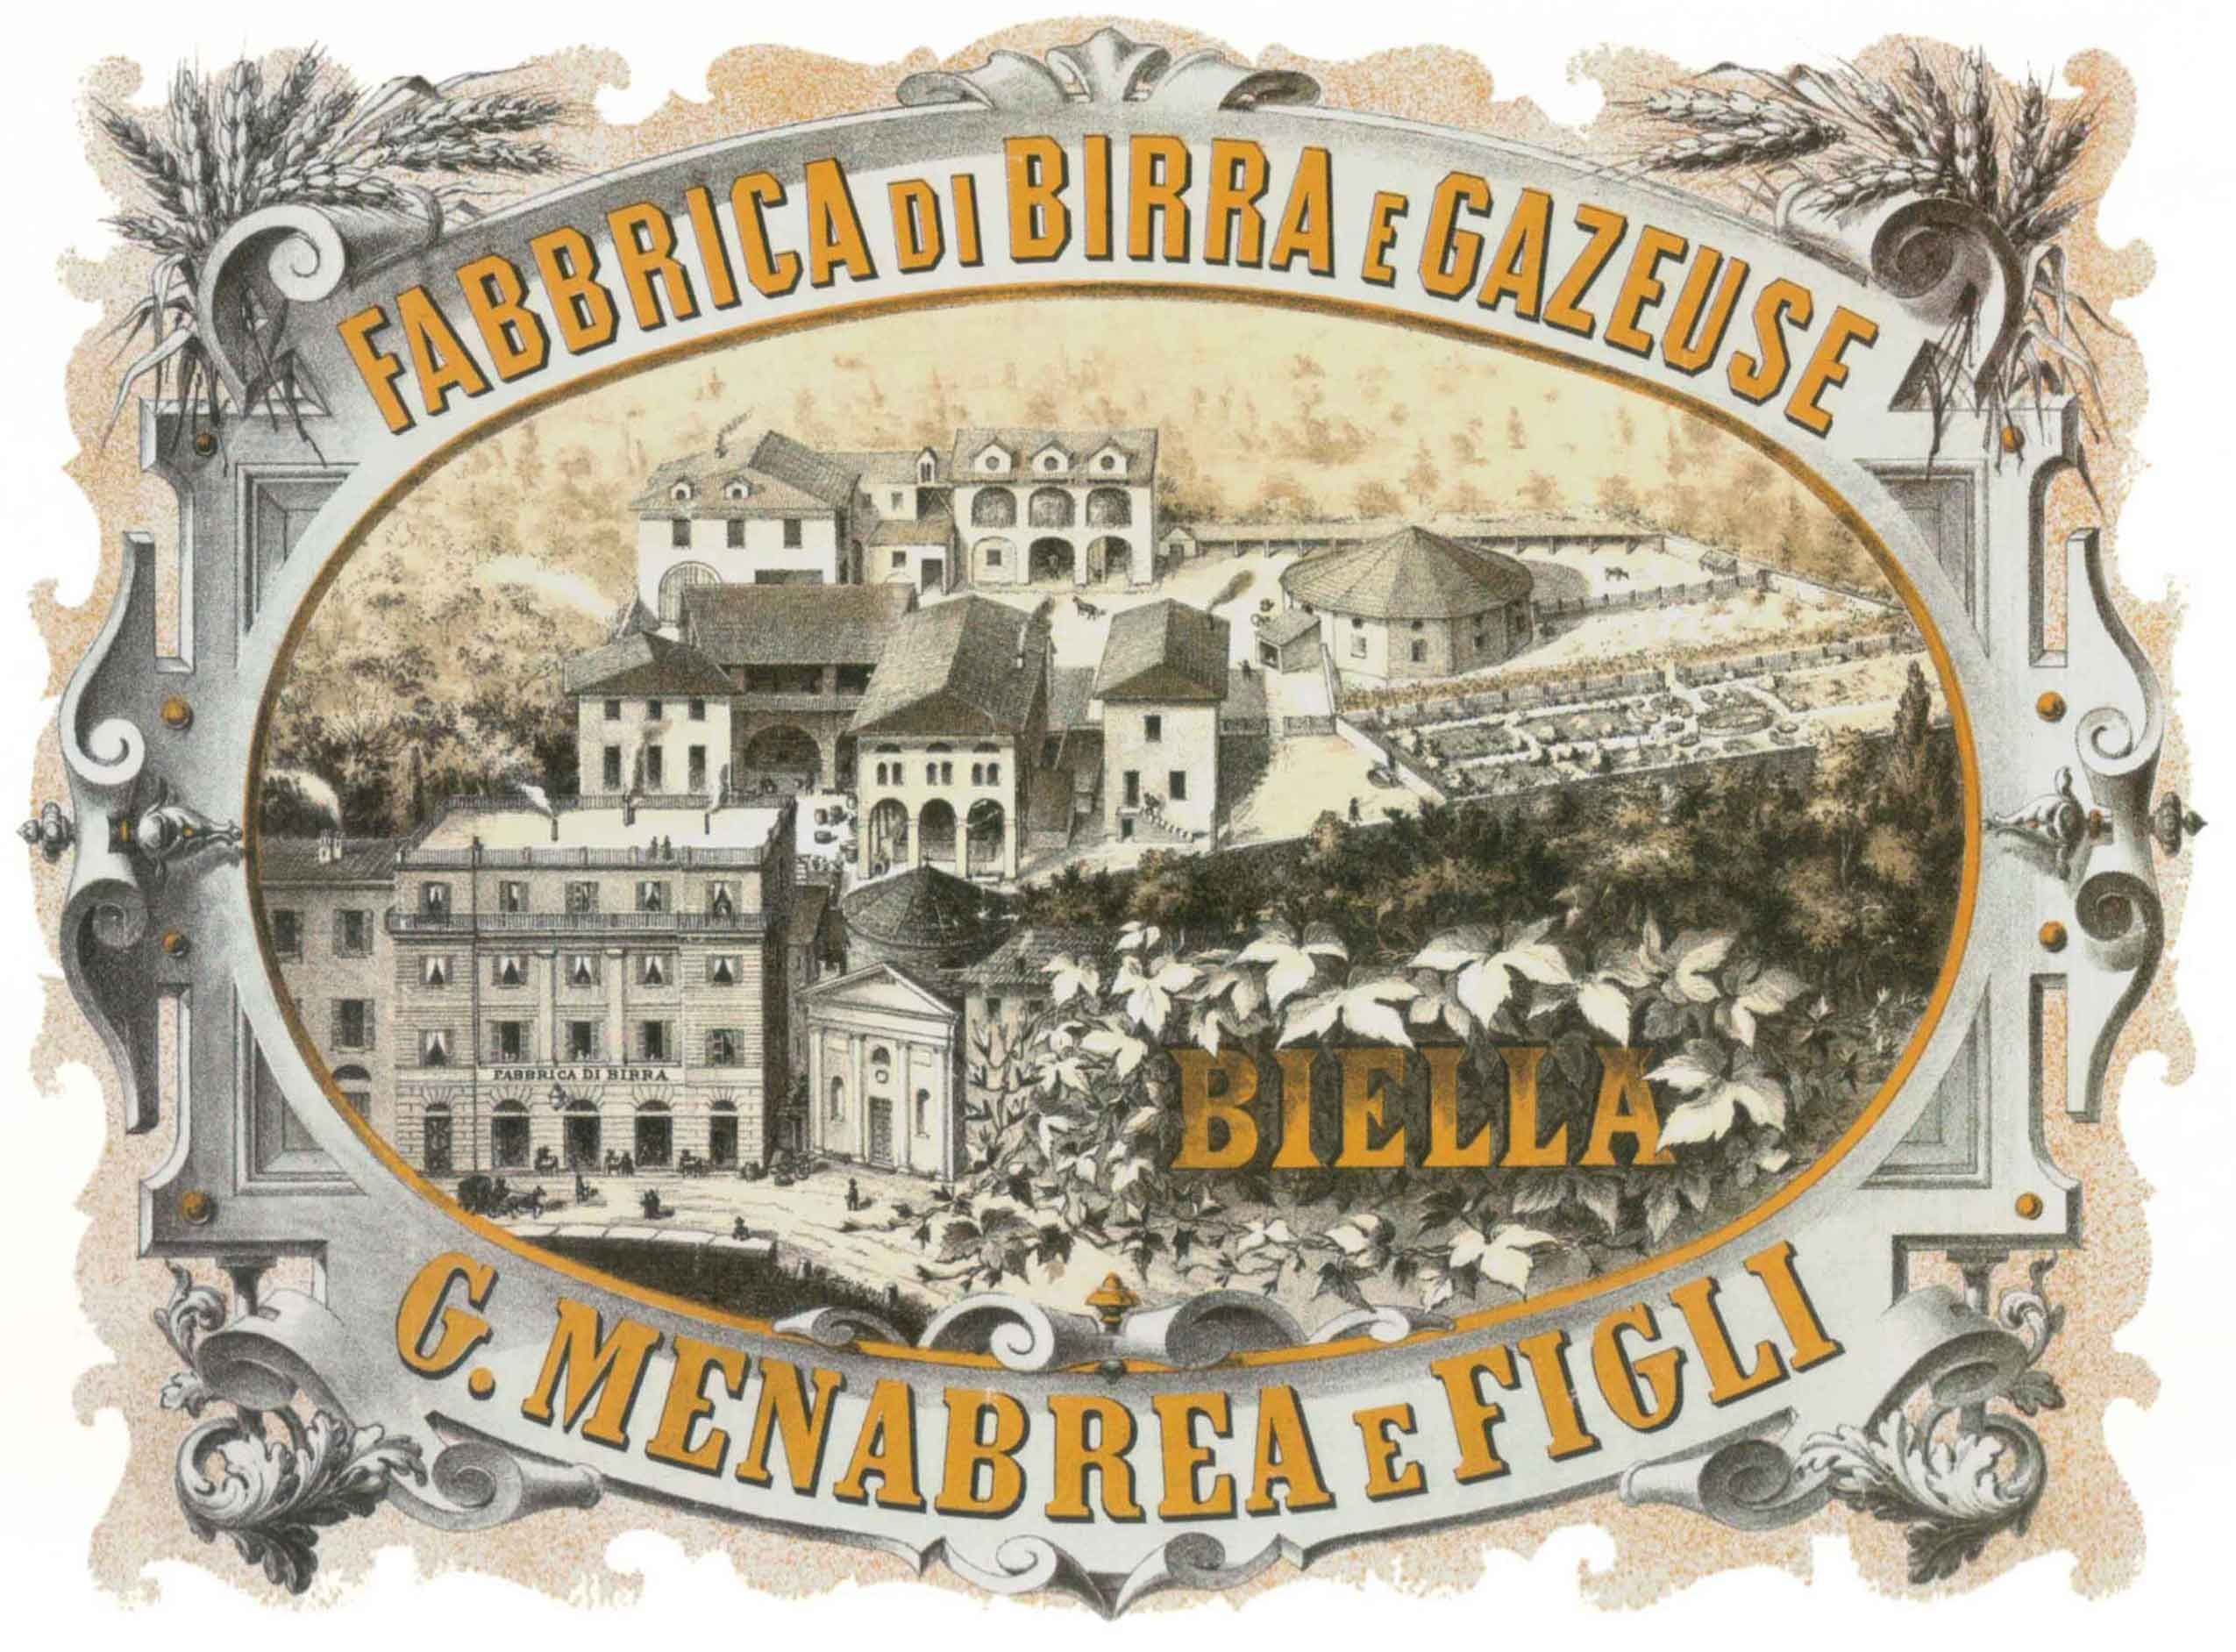 The Menabrea Brewery 1846 Historical Image 1